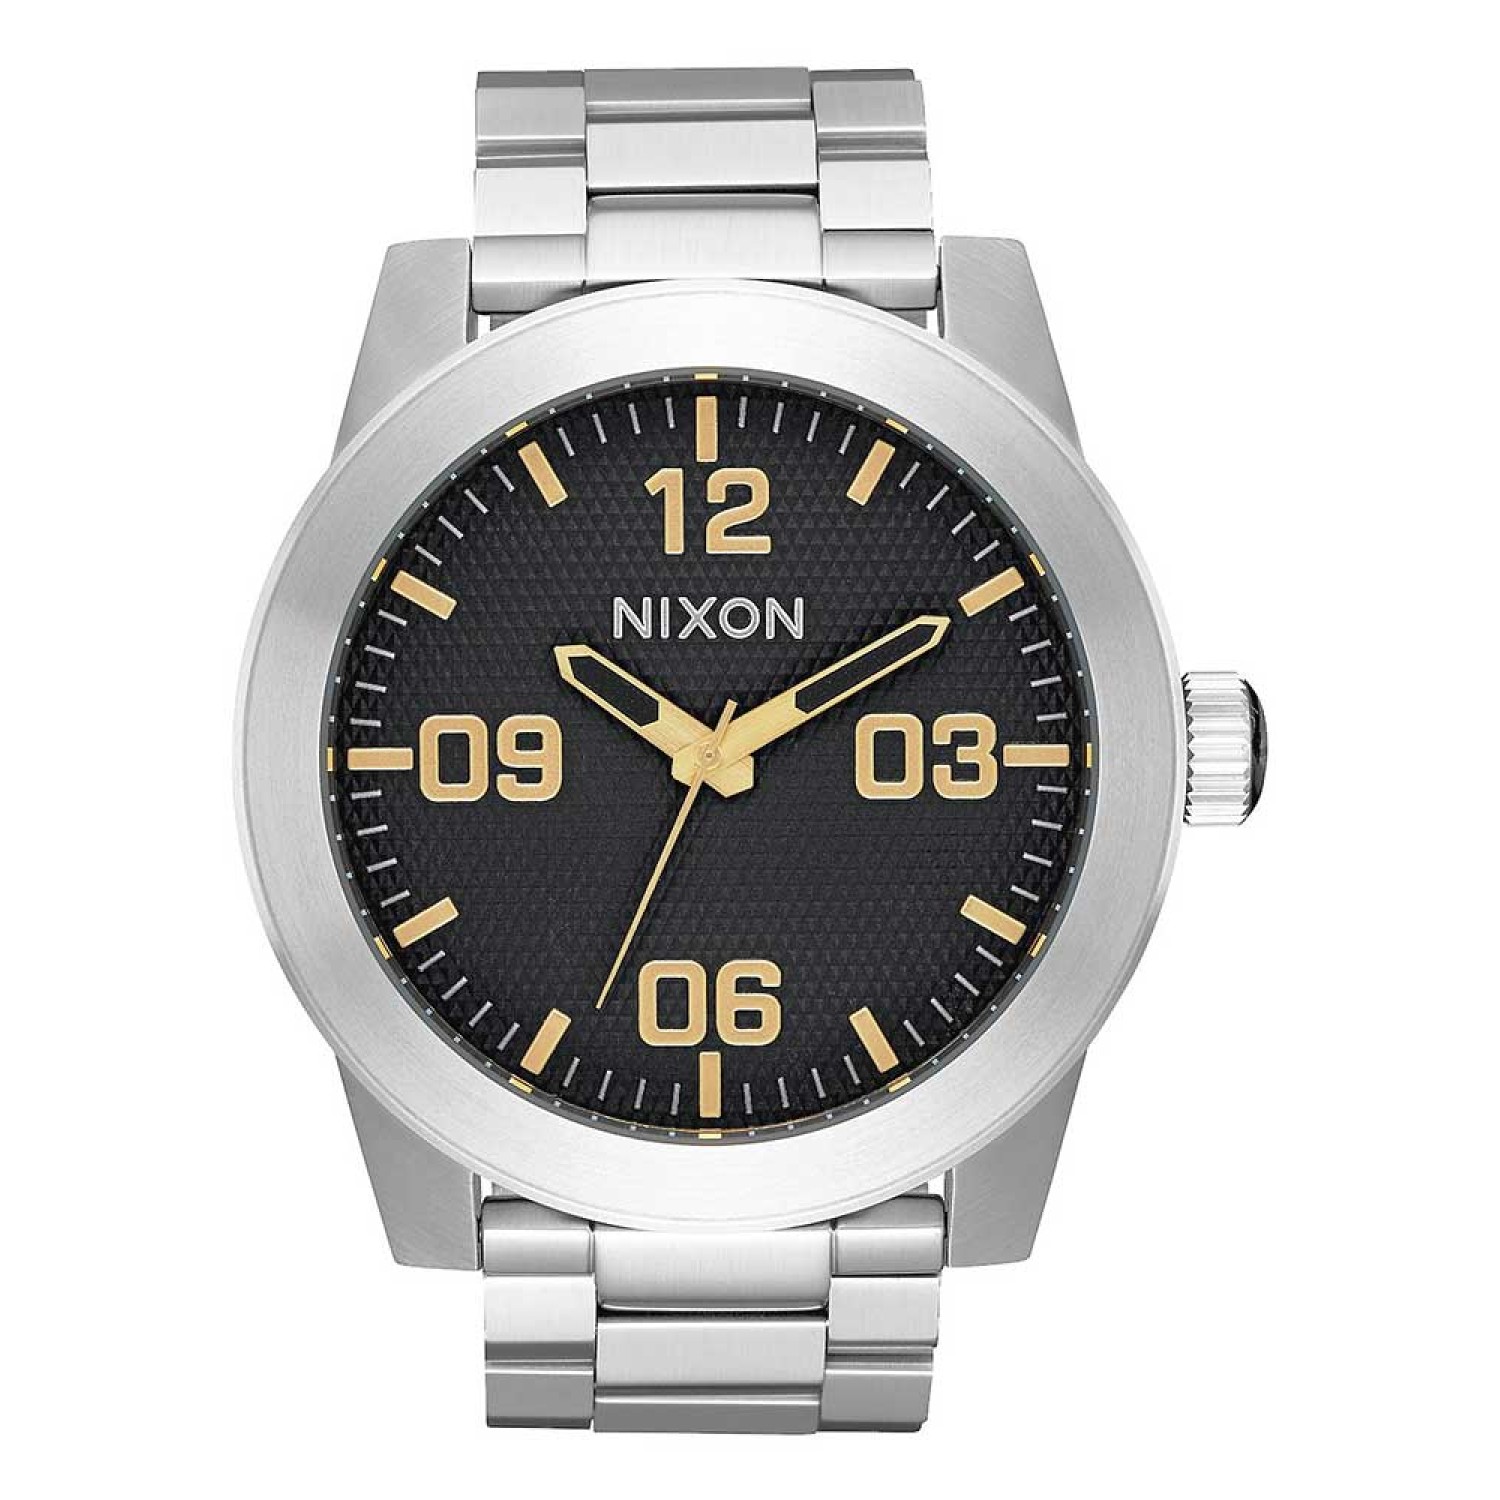 A3462730 NIXON Mens CORPORAL Silver Watch. Rugged and functional, with a 48 mm case crafted with unique angles and lines2 Year  Guarantee 3 Months No Payments and Interest for Q Card holders This watch is pressure rated at 100 metres or 10bar. This makes 